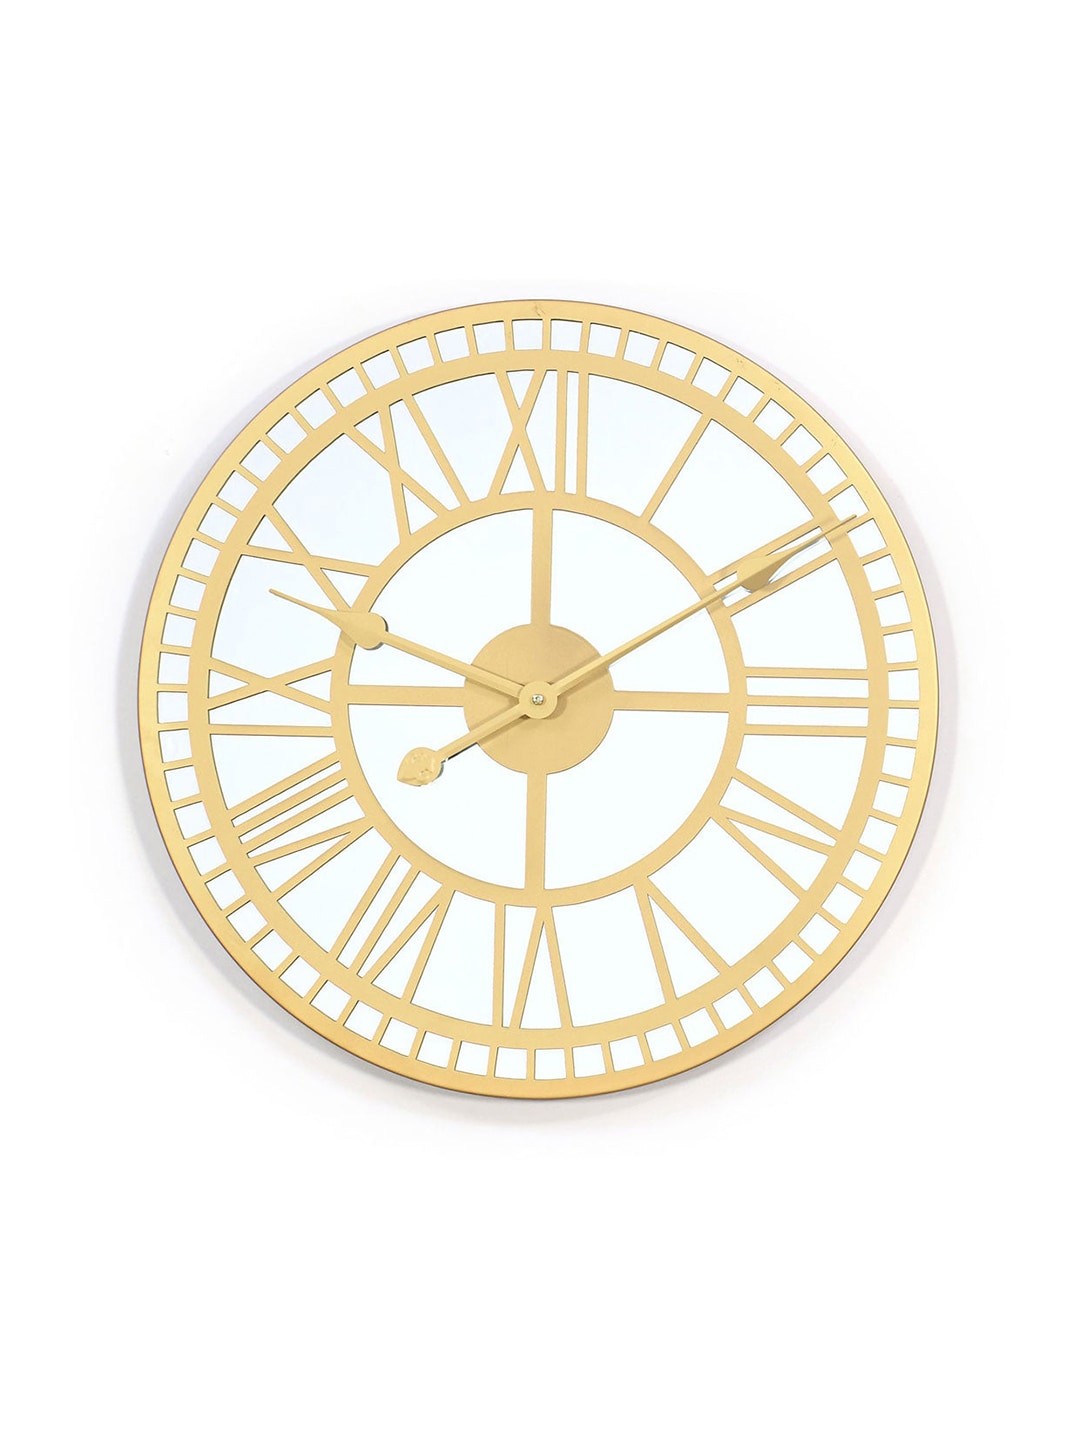 Athome by Nilkamal Gold-Toned Contemporary Wall Clock Price in India